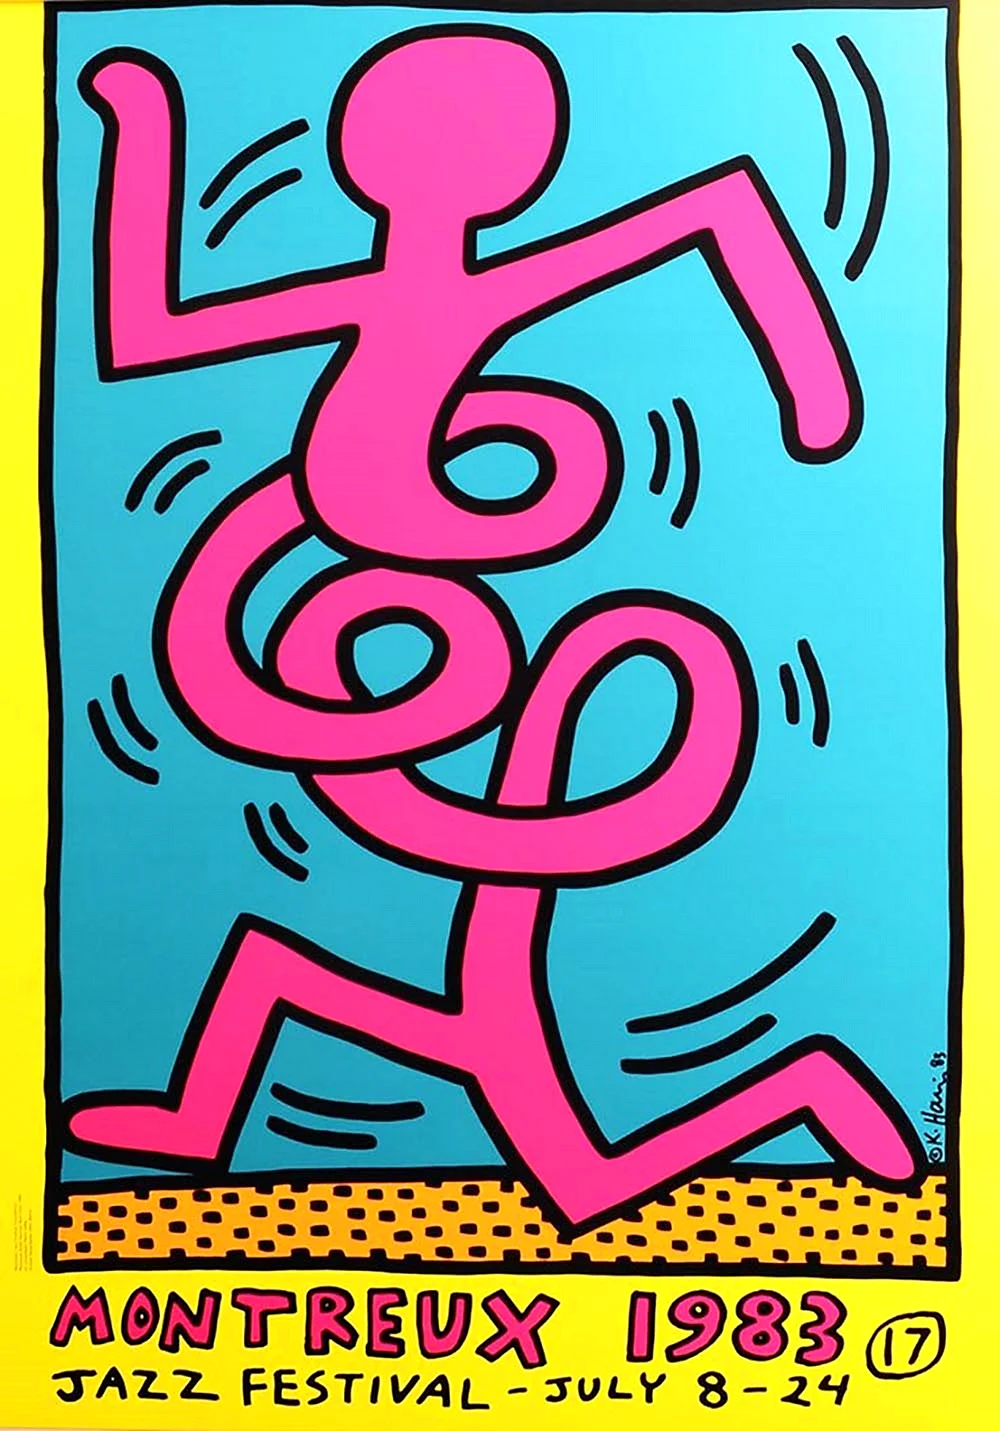 Keith Haring Montreux Wallpaper For iPhone